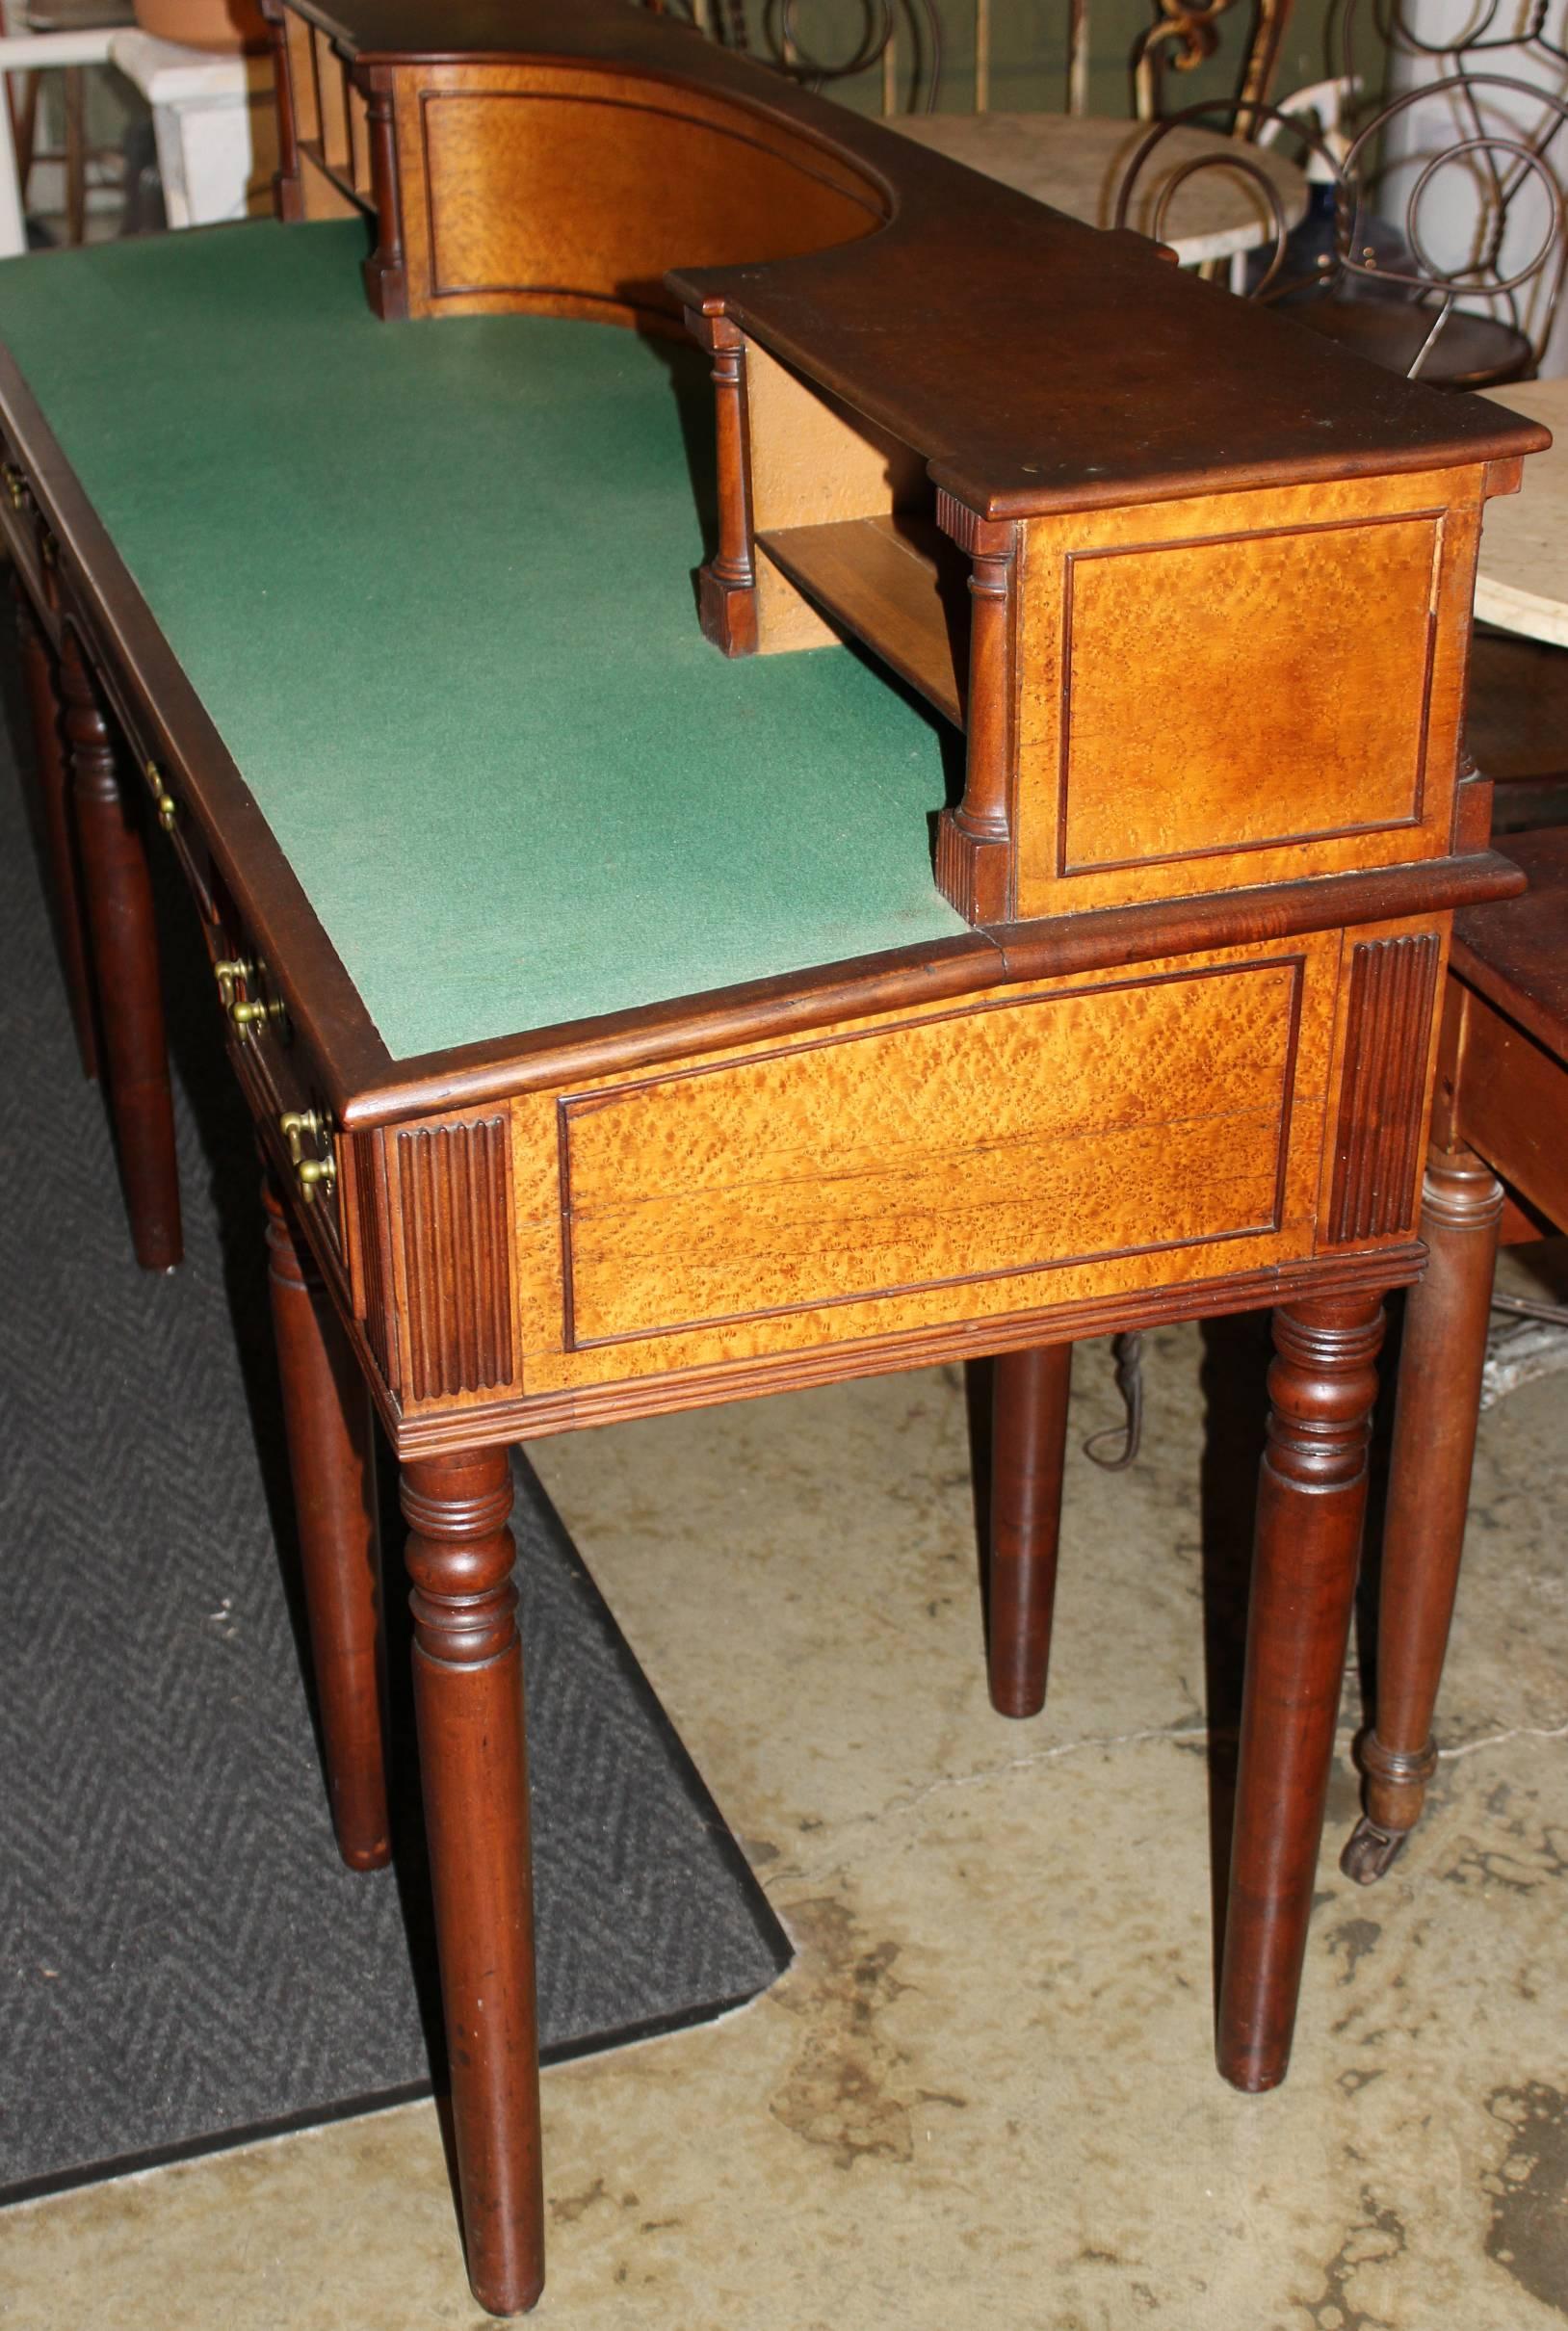 Carved 19th Century Porter Blanchard Bird's-eye Maple Concord NH State House Desk